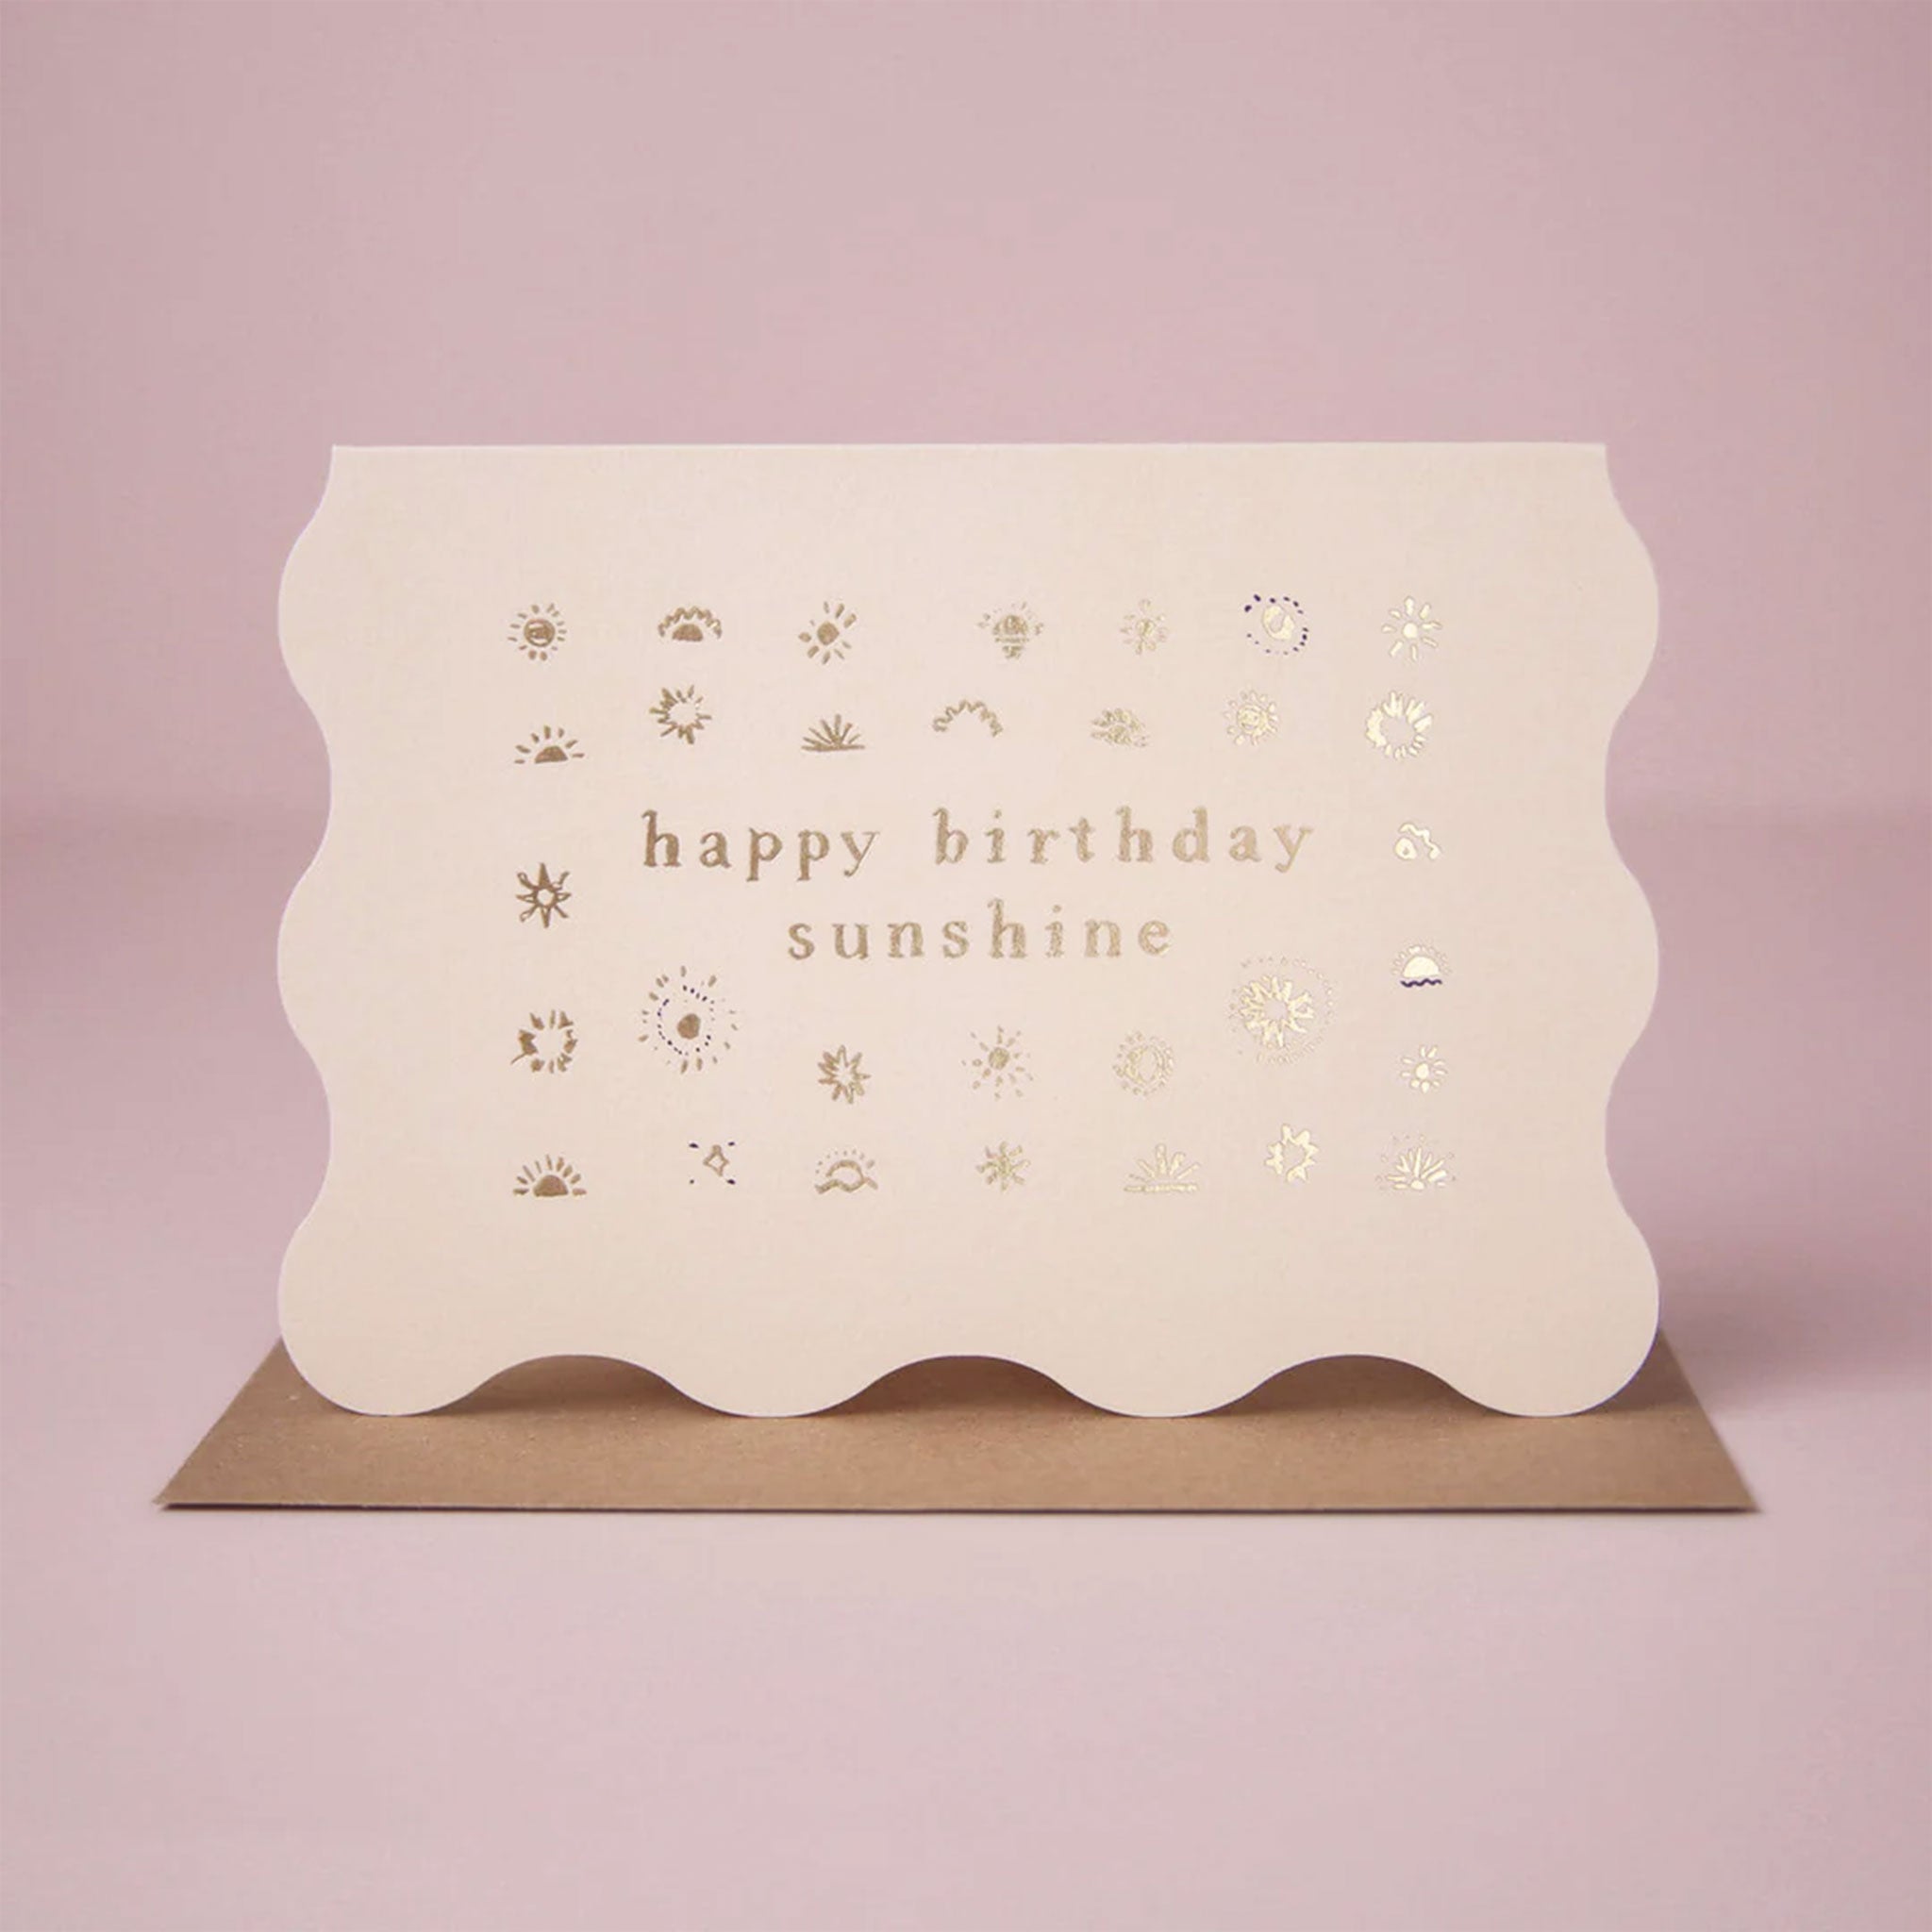 On a pink background is a wavy ivory card that reads, "happy birthday sunshine". 